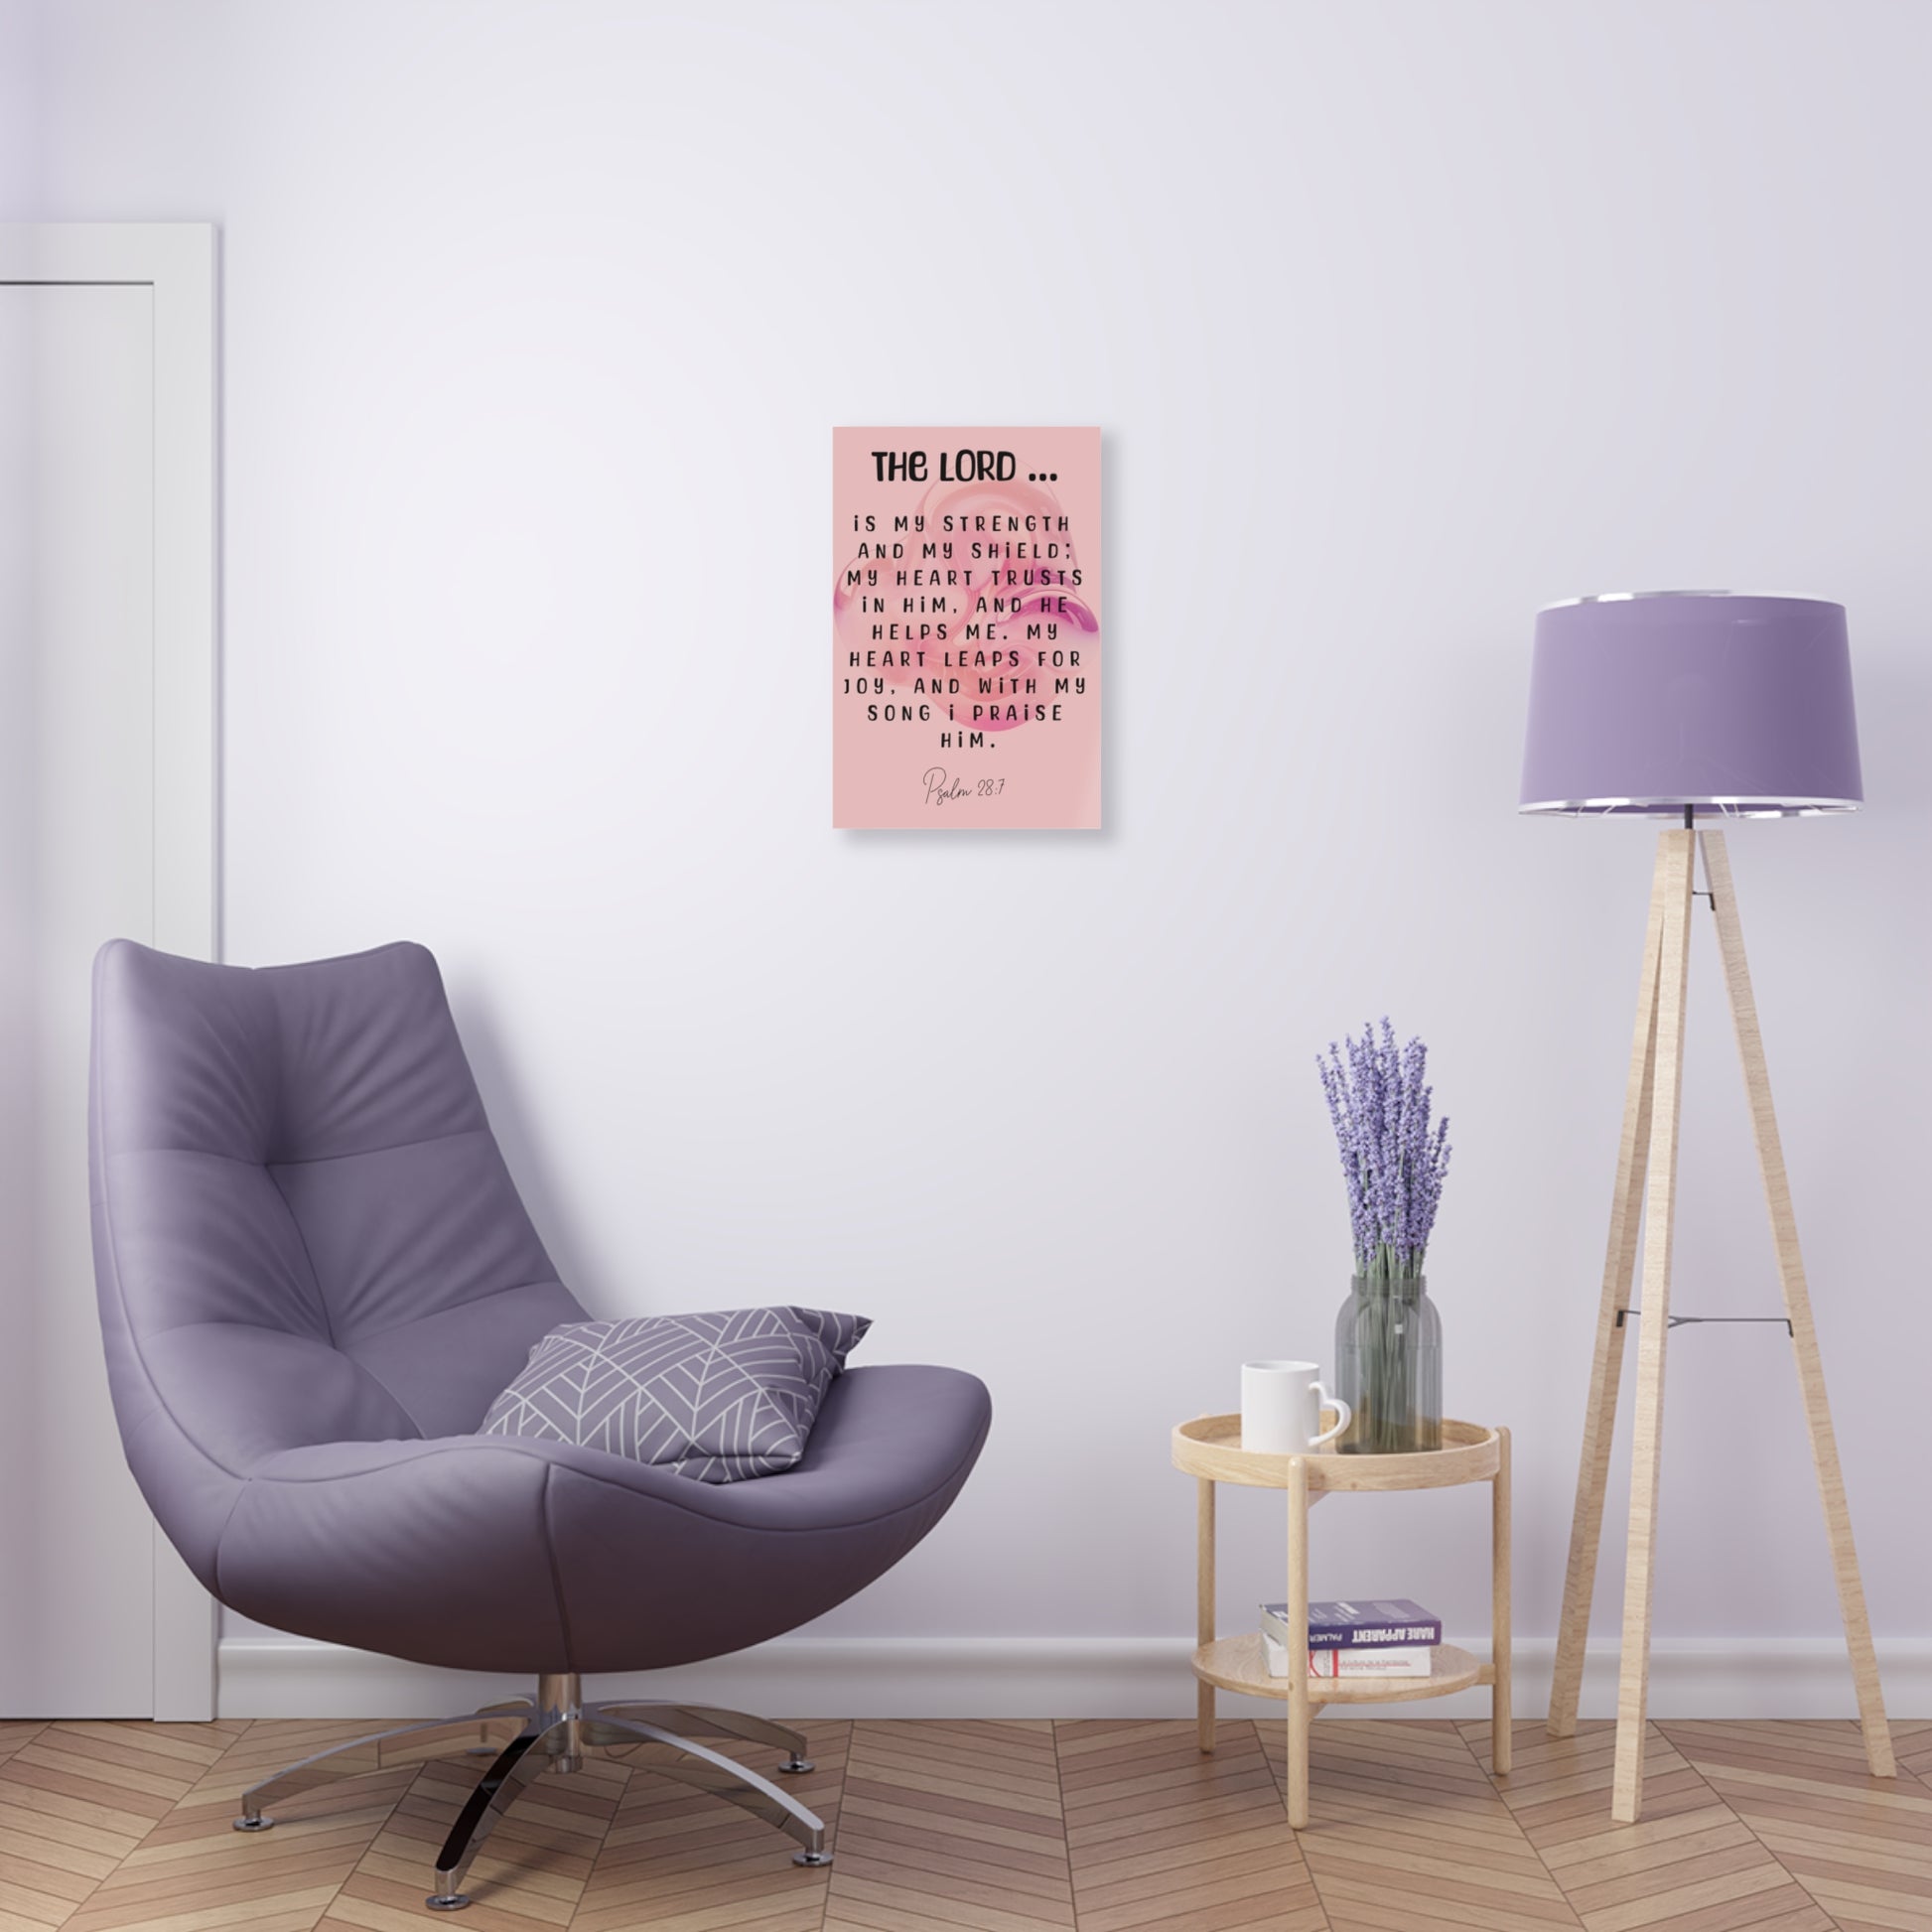 Scripture Art in Room Wall - Abstract Mirror Acrylic Print | Art & Wall Decor,Assembled in the USA,Assembled in USA,Decor,Home & Living,Home Decor,Indoor,Made in the USA,Made in USA,Poster